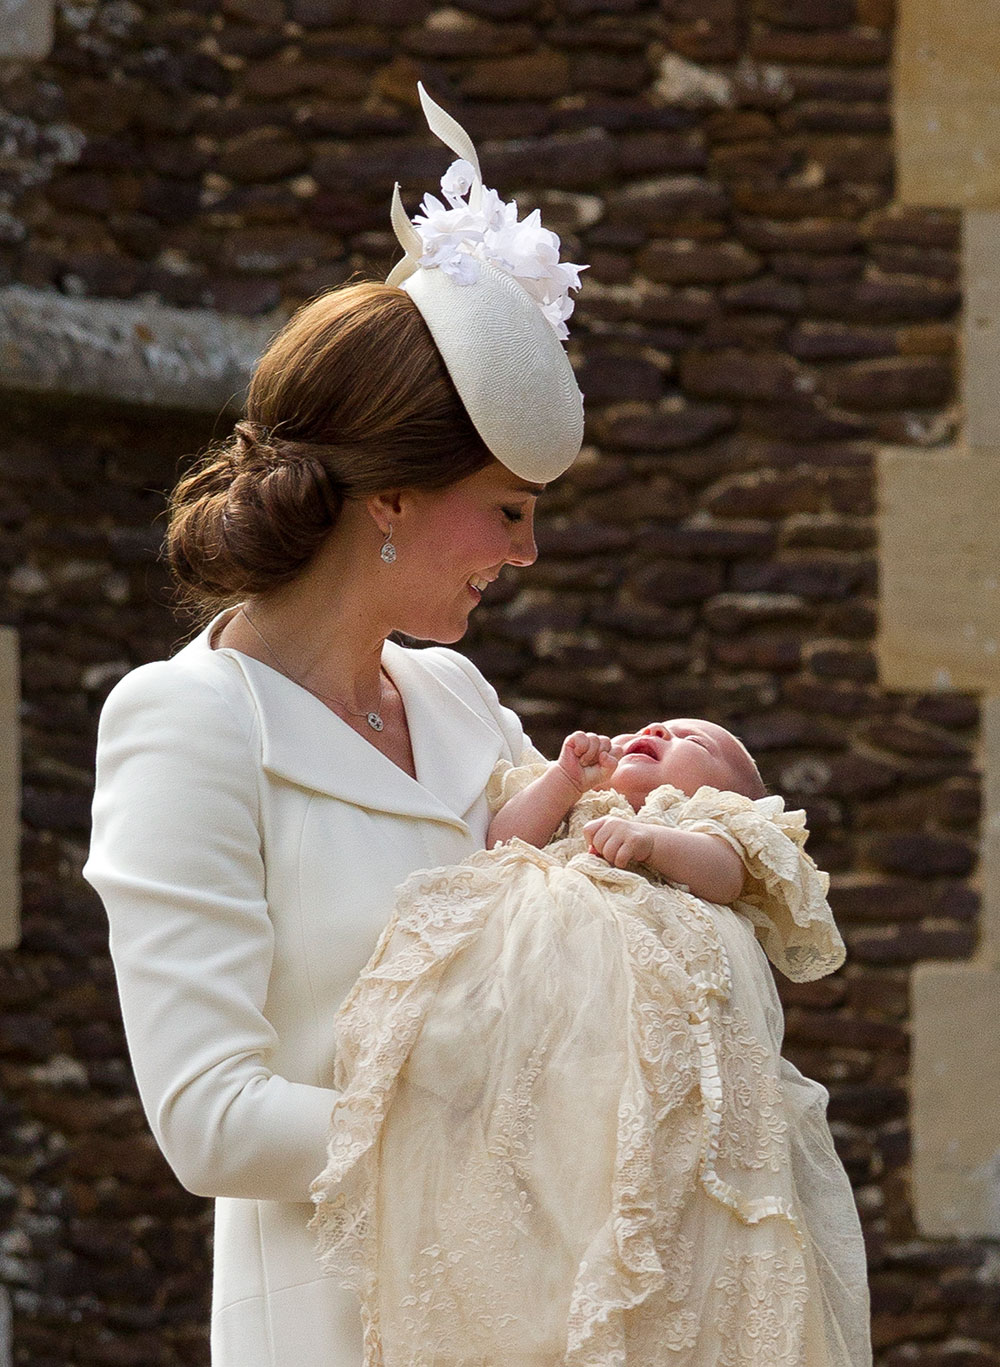 Princess Charlotte was dressed in a custom Honiton lace and white satin gown designed by the Queen’s dressmaker, Andrea Kelly. It is a replica of the 174-year-old gown worn to royal christenings for generations, including that of her brother Prince George.